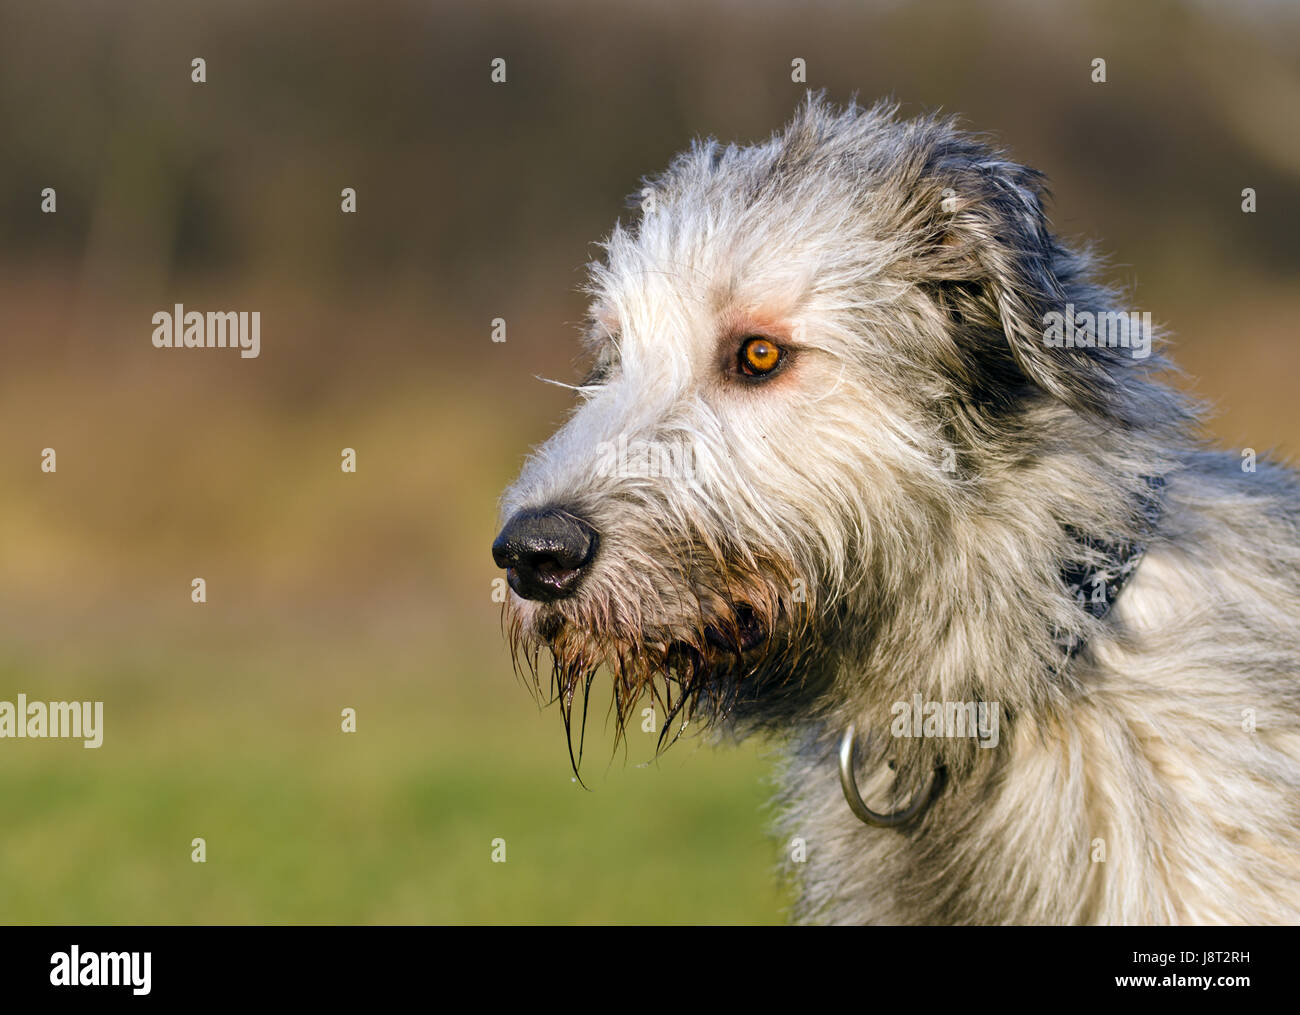 Chien, chiens, wolfhound, Irish, animal, animal, animaux, homme, masculin, Sassy, Banque D'Images